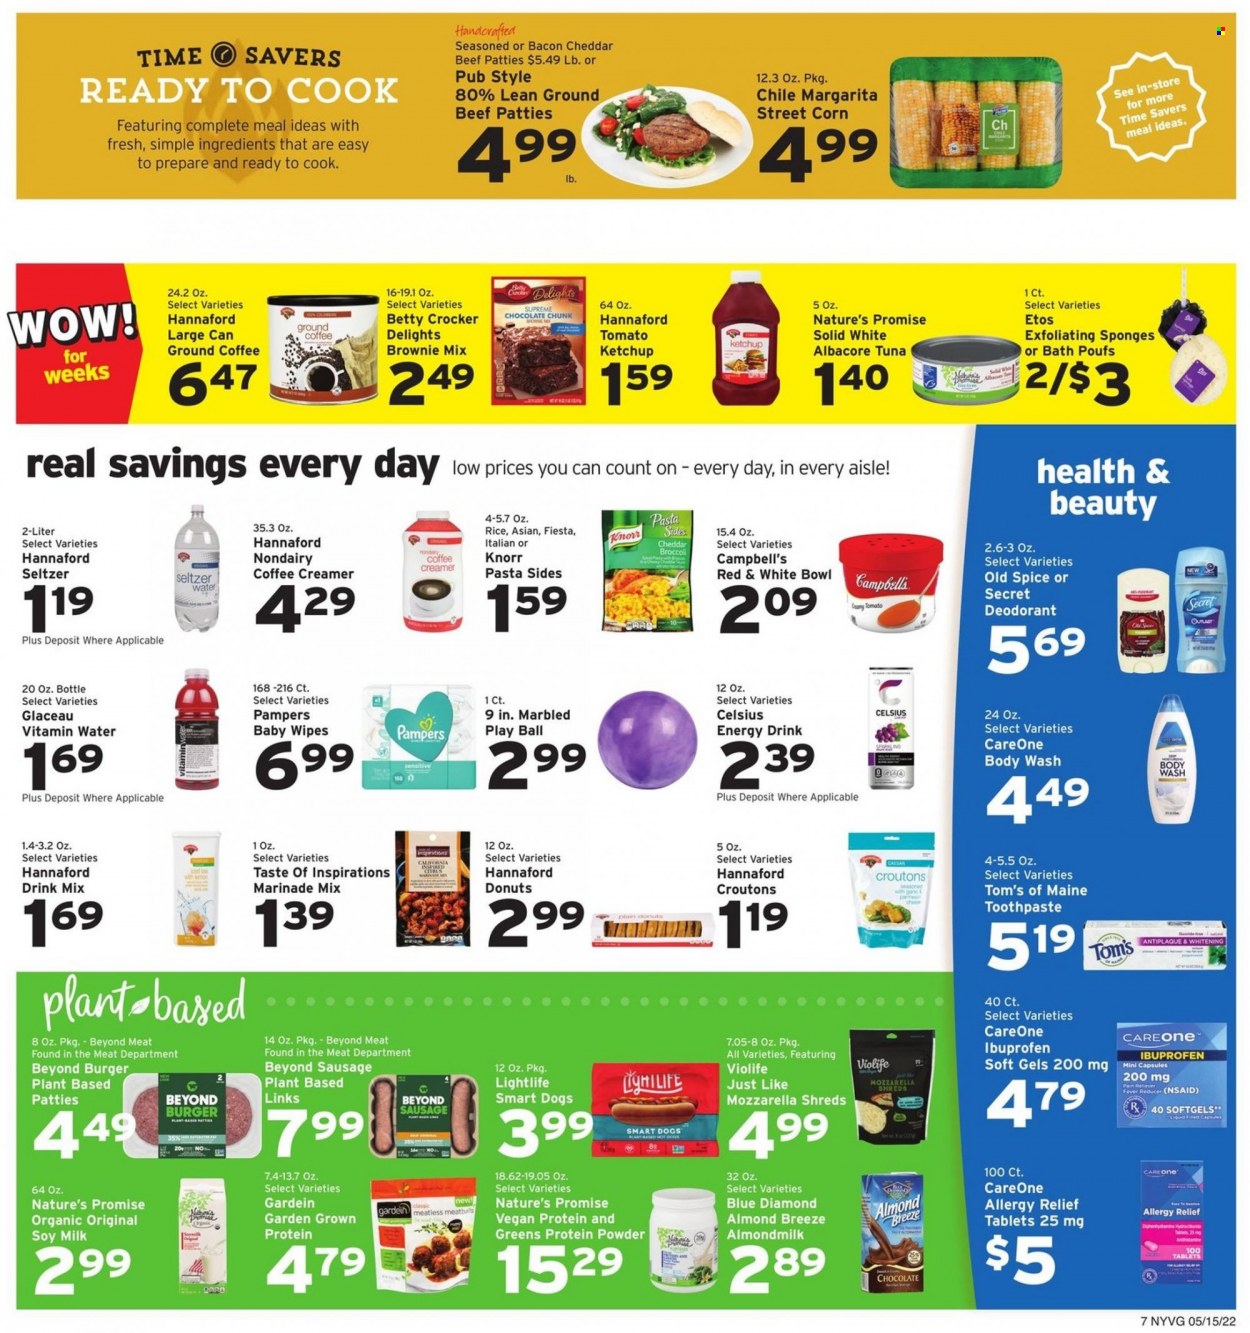 thumbnail - Hannaford Flyer - 05/15/2022 - 05/21/2022 - Sales products - Nature’s Promise, donut, brownie mix, tuna, Campbell's, meatballs, hamburger, Knorr, pasta sides, bacon, sausage, cheese, almond milk, soy milk, Almond Breeze, creamer, chocolate, croutons, spice, ketchup, marinade, Blue Diamond, energy drink, seltzer water, vitamin water, ground coffee, beef meat, ground beef, wipes, Pampers, baby wipes, body wash, Old Spice, toothpaste, anti-perspirant, deodorant, bowl, Ibuprofen, whey protein, allergy relief. Page 7.